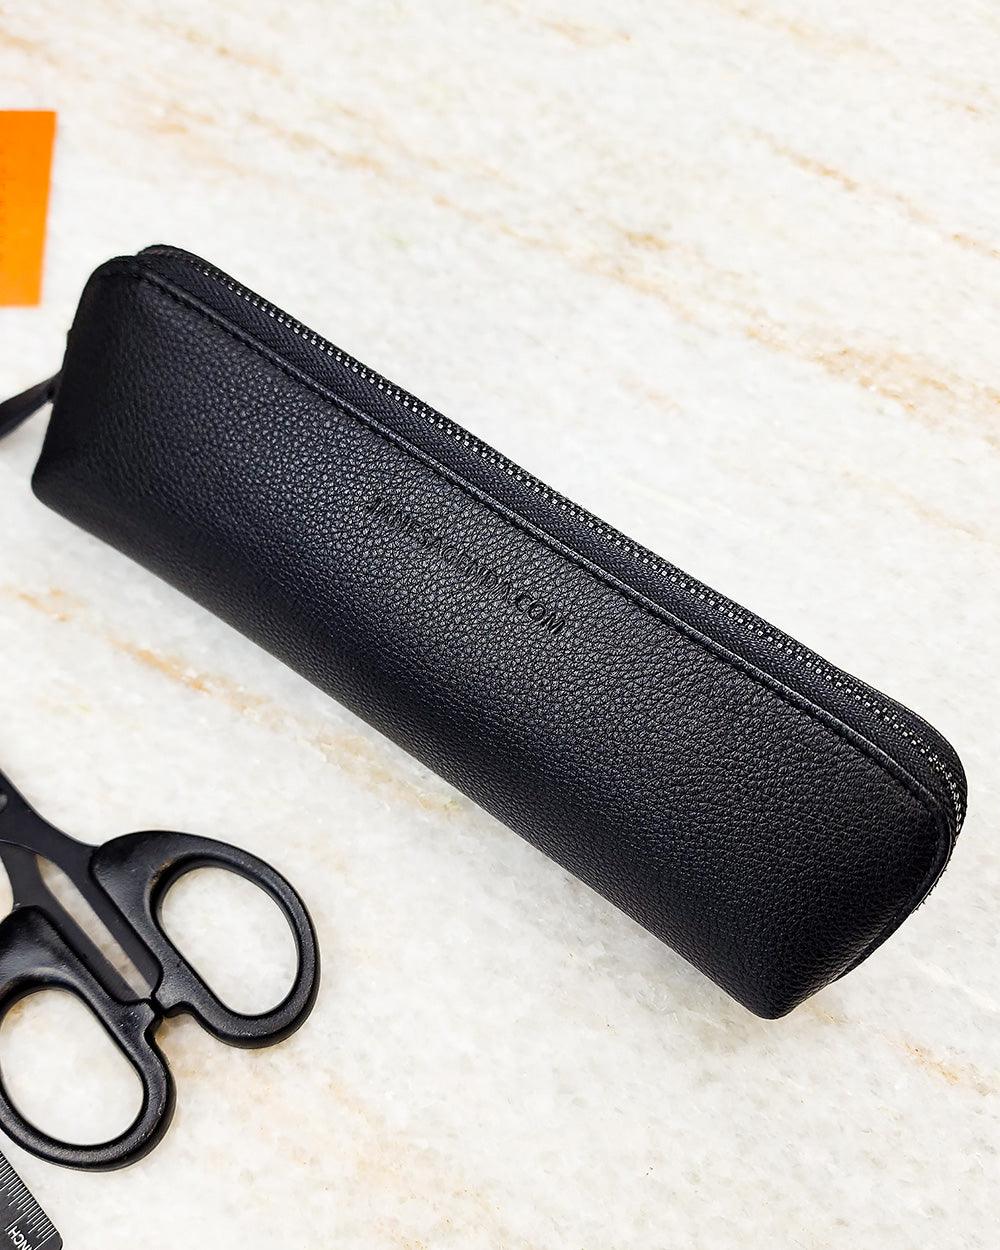 Black vegan leather pen pouch with a gun-metal zipper for holding all of your pens and planner accessories by Jane's Agenda.